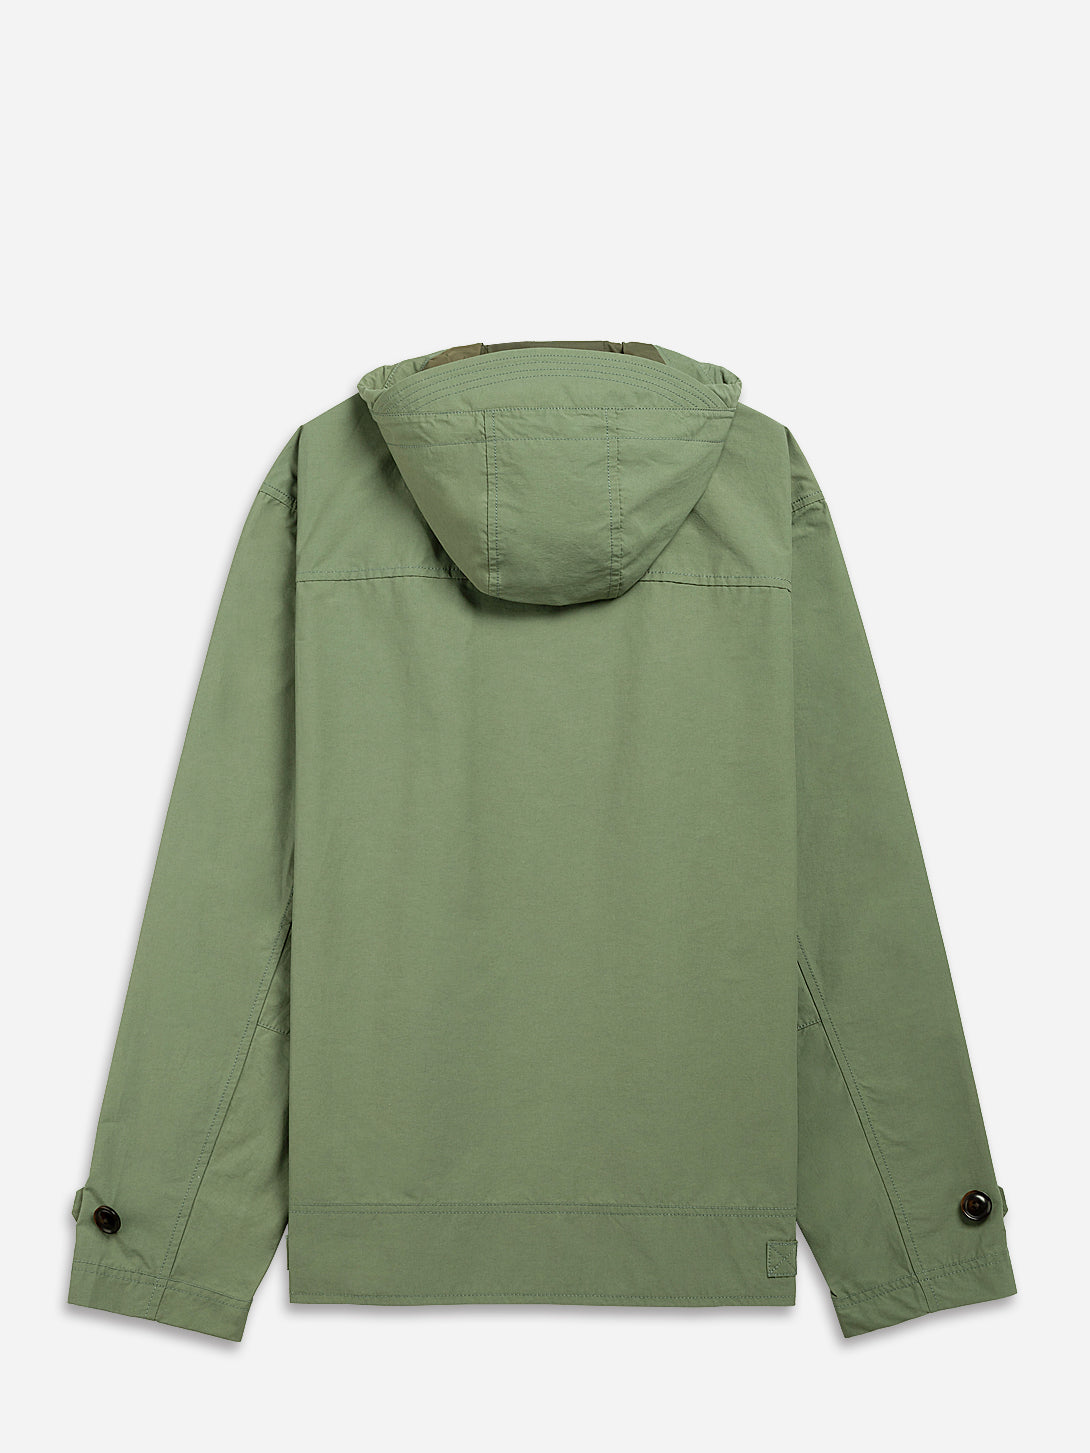 AGAVE GREEN Scout Cotton Nylon Parka Mens Water Repellent Zip Up